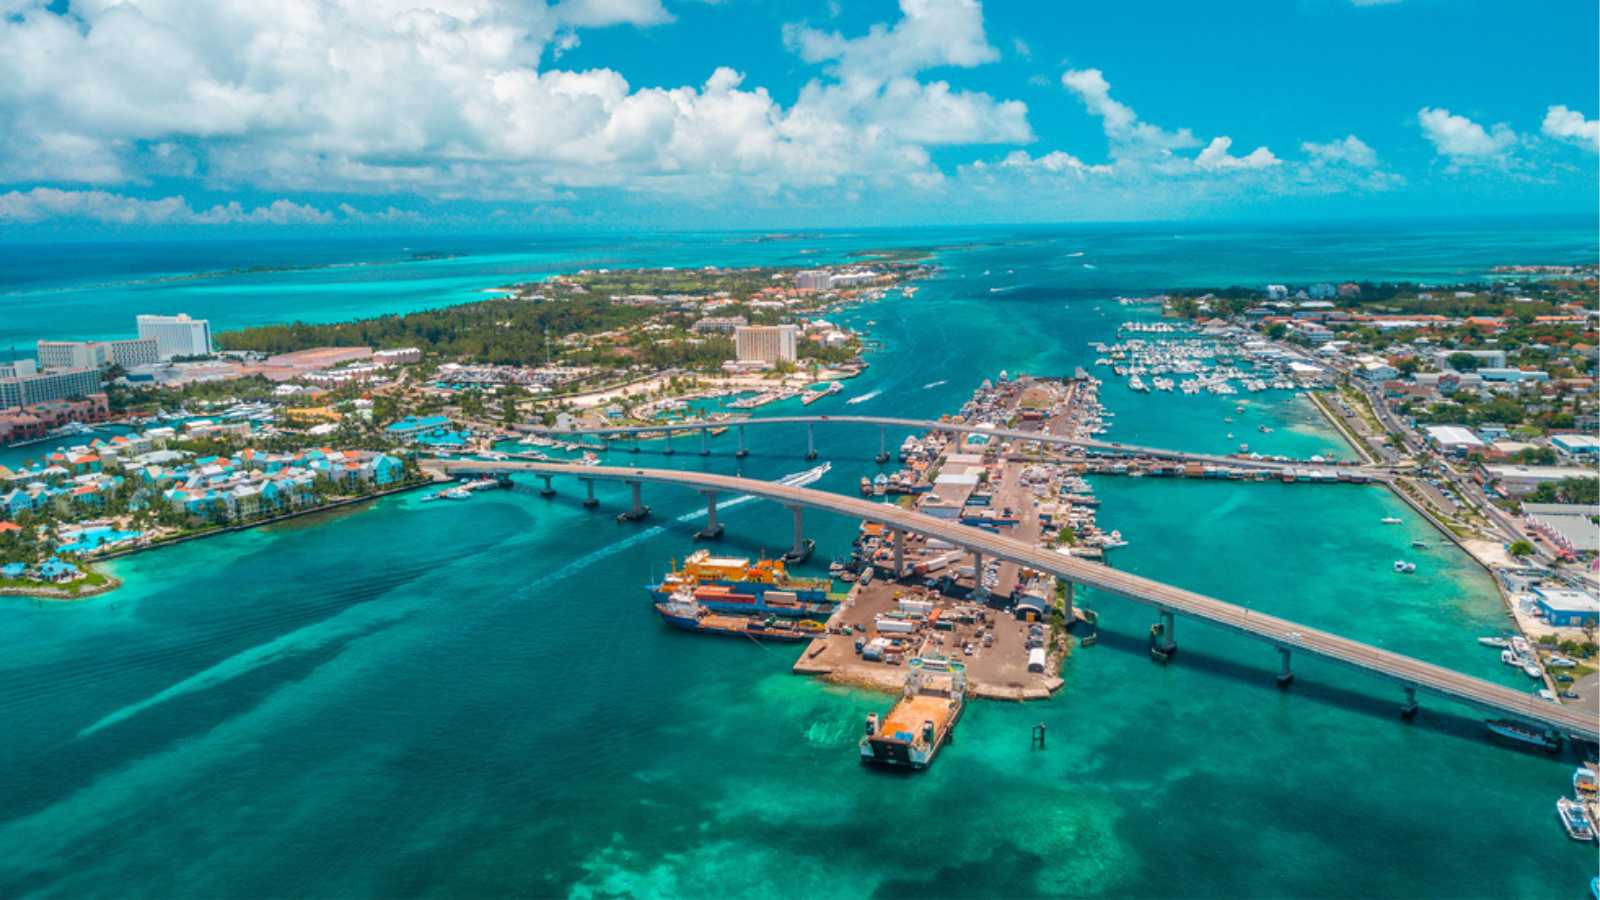 <p>Understandably, inexperienced or research-phobic vacationers might read “Bahamas,” book a flight, and fail to realize that Nassau is not typical of the idyllic Bahamian vacation. As the capital city, Nassau offers more chaos and civilization than most Bahamian vacationers seek.</p>